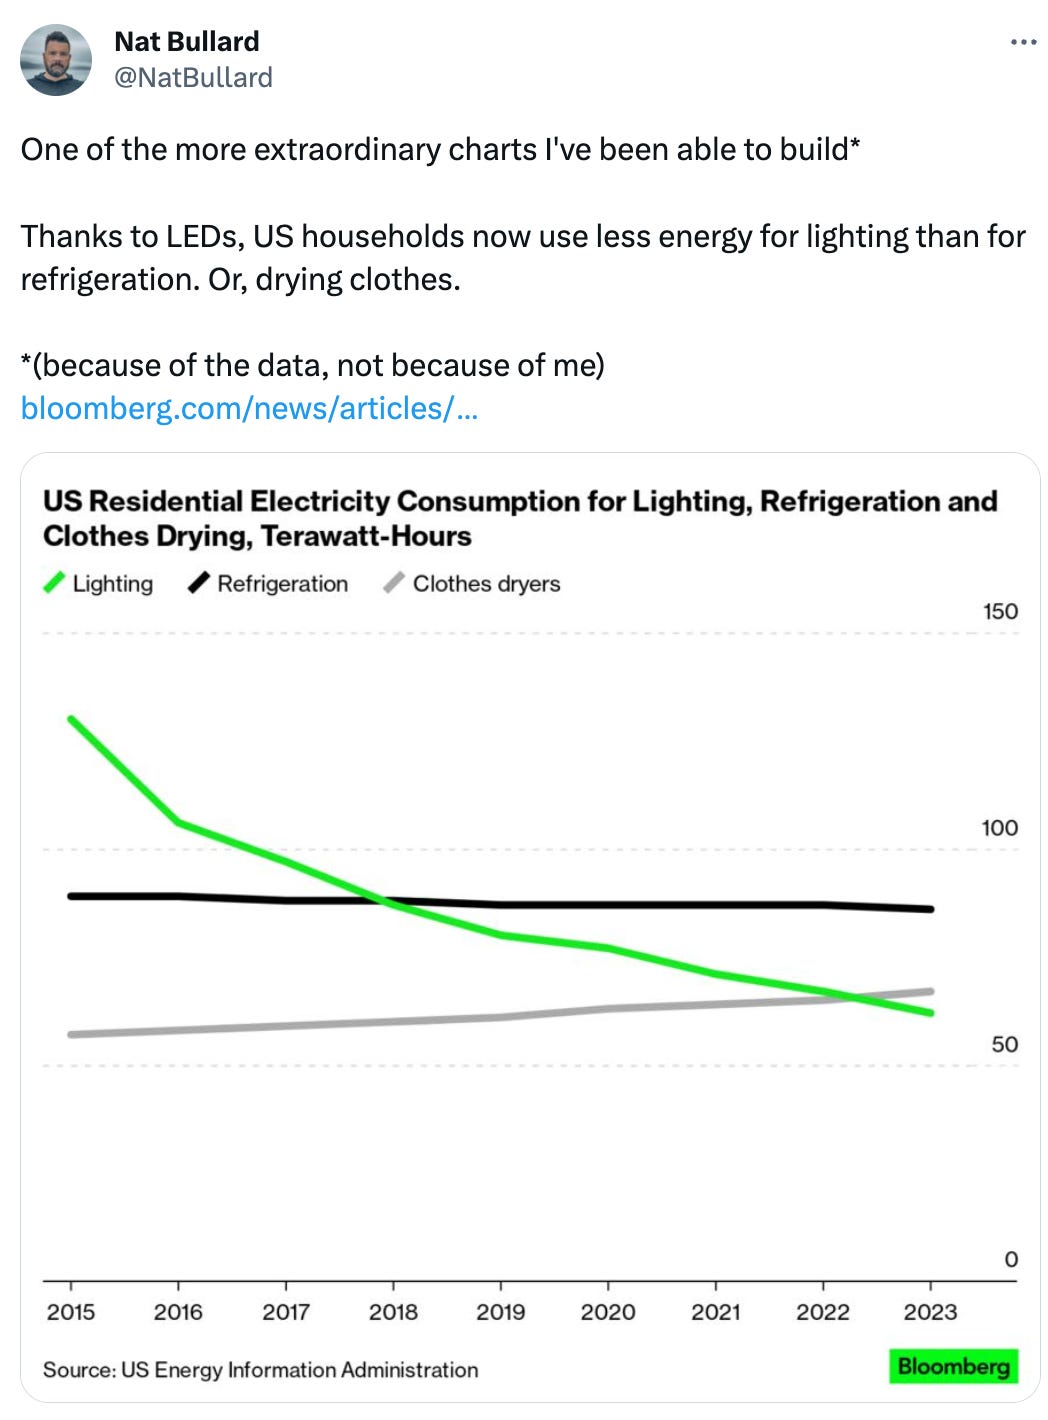  Nat Bullard @NatBullard One of the more extraordinary charts I've been able to build*   Thanks to LEDs, US households now use less energy for lighting than for refrigeration. Or, drying clothes.   *(because of the data, not because of me) https://bloomberg.com/news/articles/2023-09-07/the-incredible-shrinking-energy-use-of-a-light-bulb?cmpid=BBD090723_GREENDAILY&utm_medium=email&utm_source=newsletter&utm_term=230907&utm_campaign=greendaily